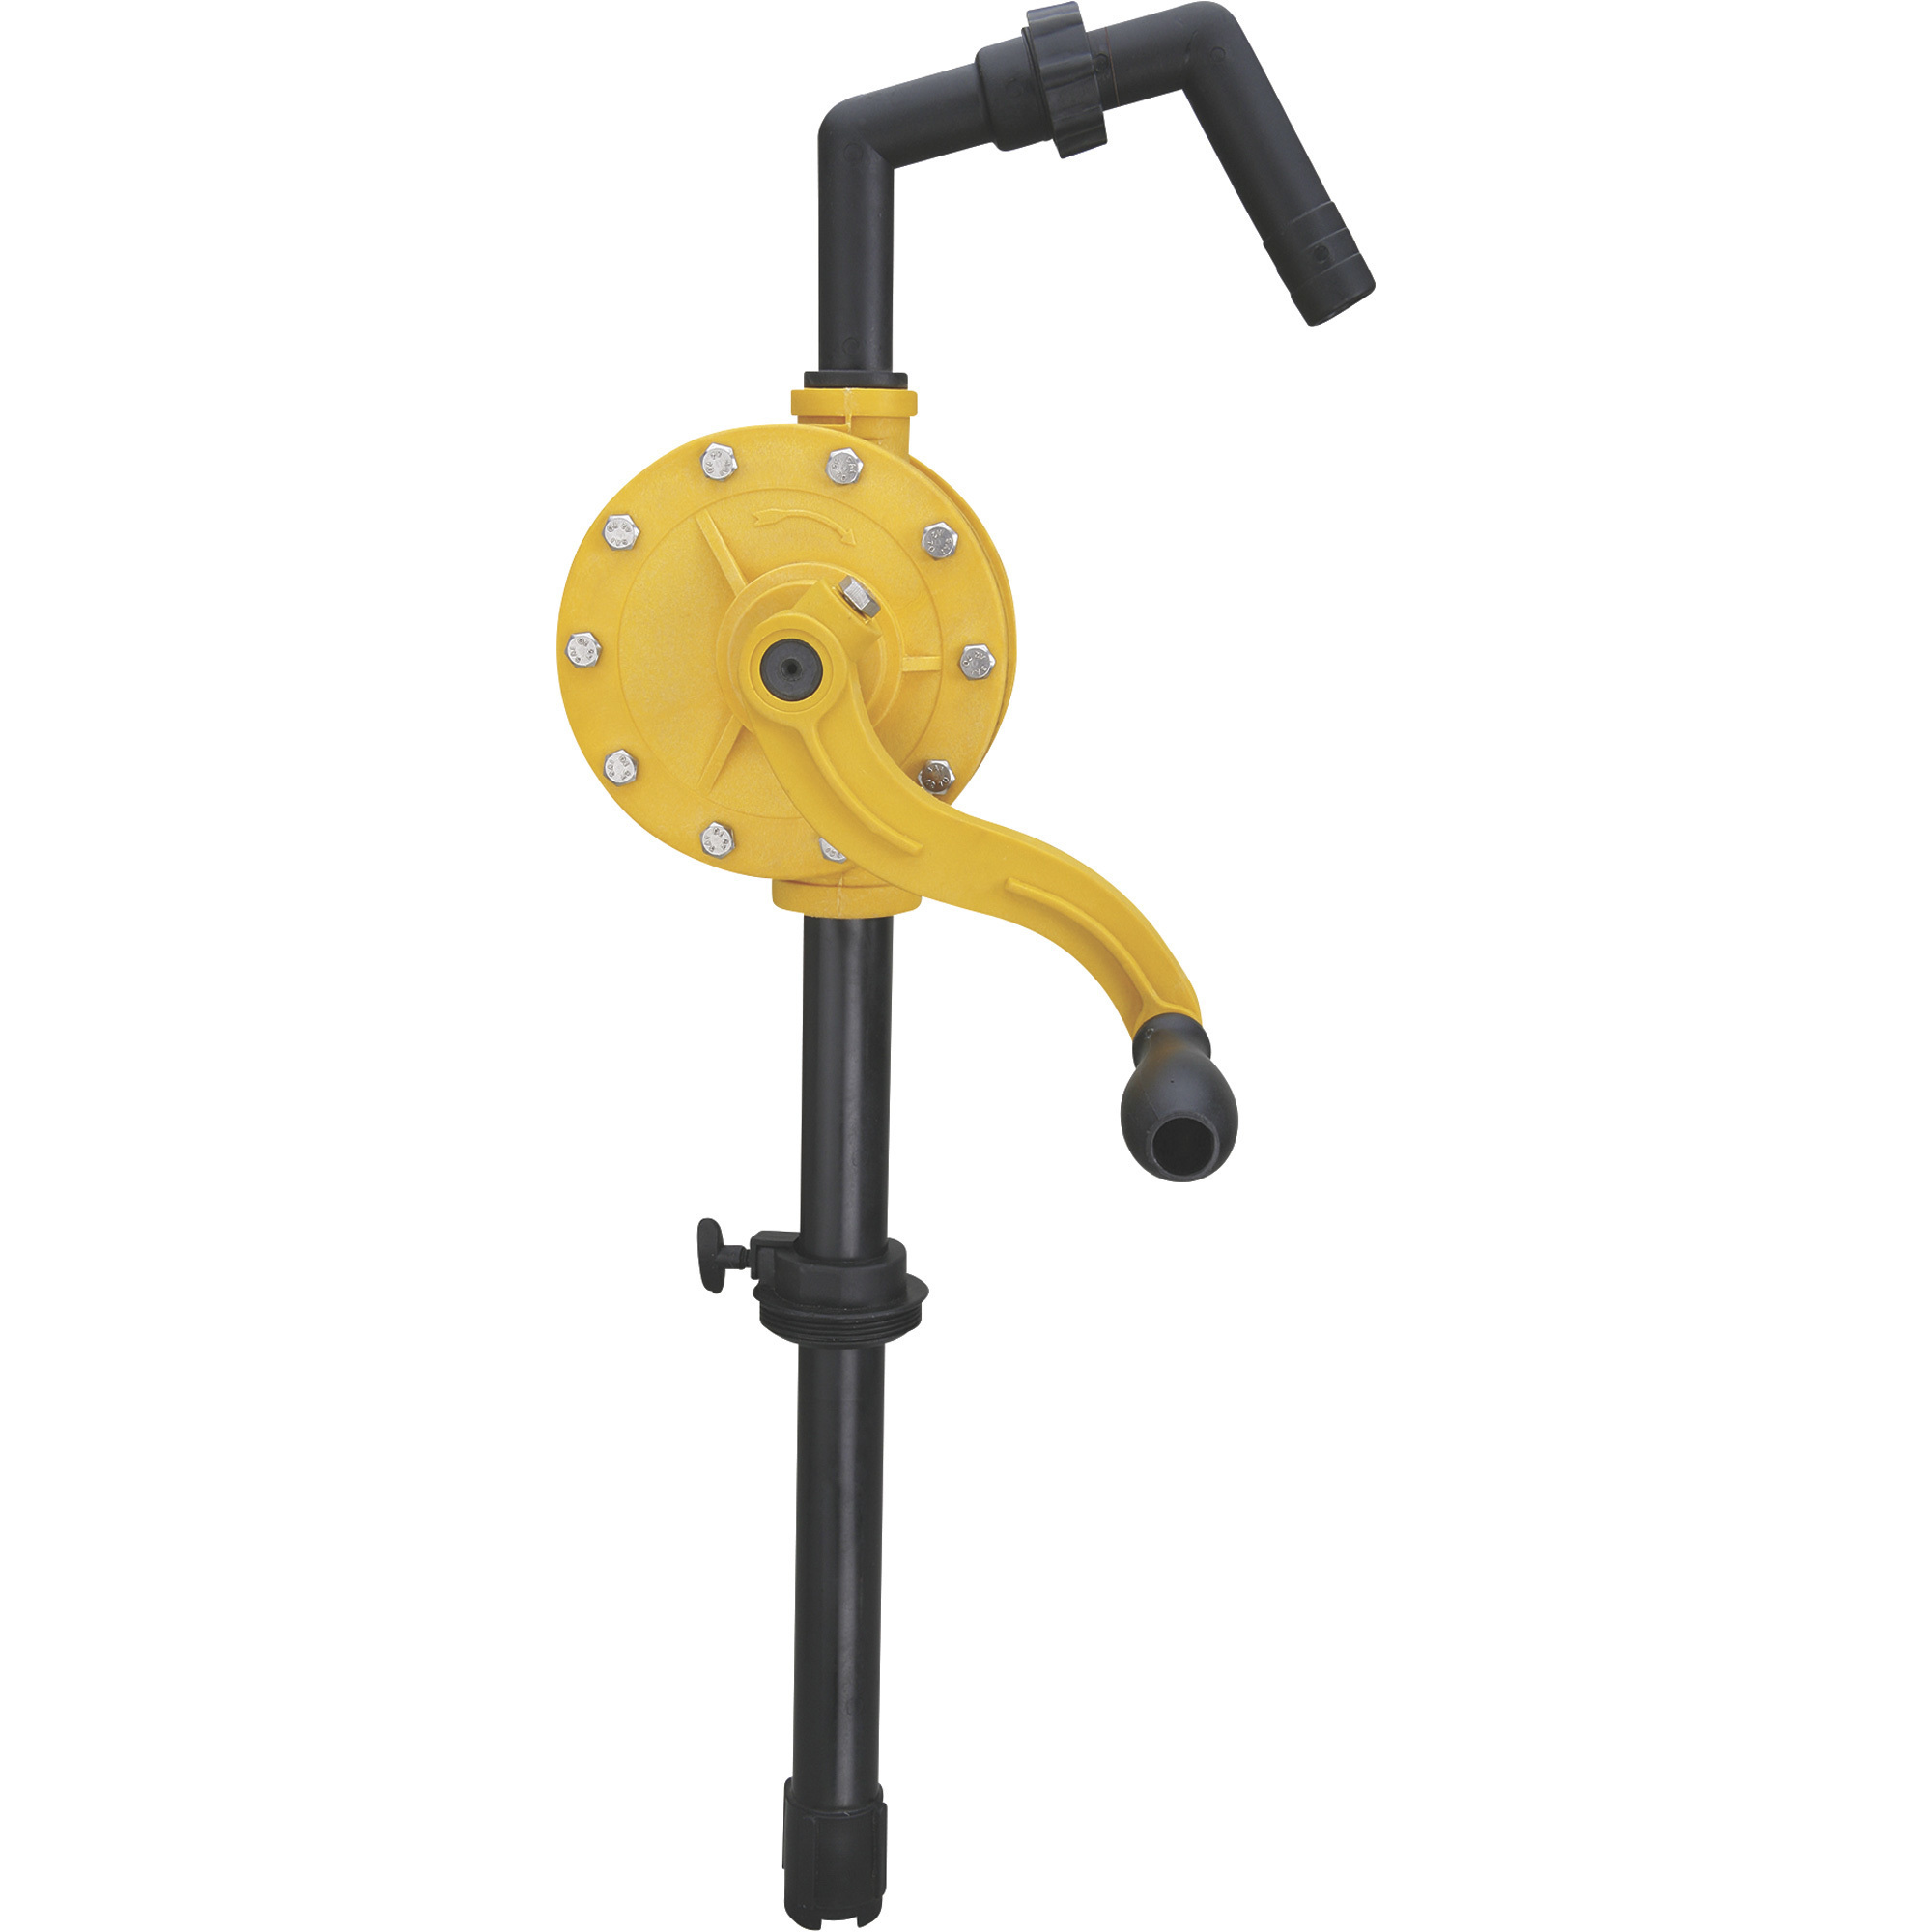 Roughneck Anti-Corrosion DEF Rotary Hand Pump, 15 to 55-Gal. Capacity